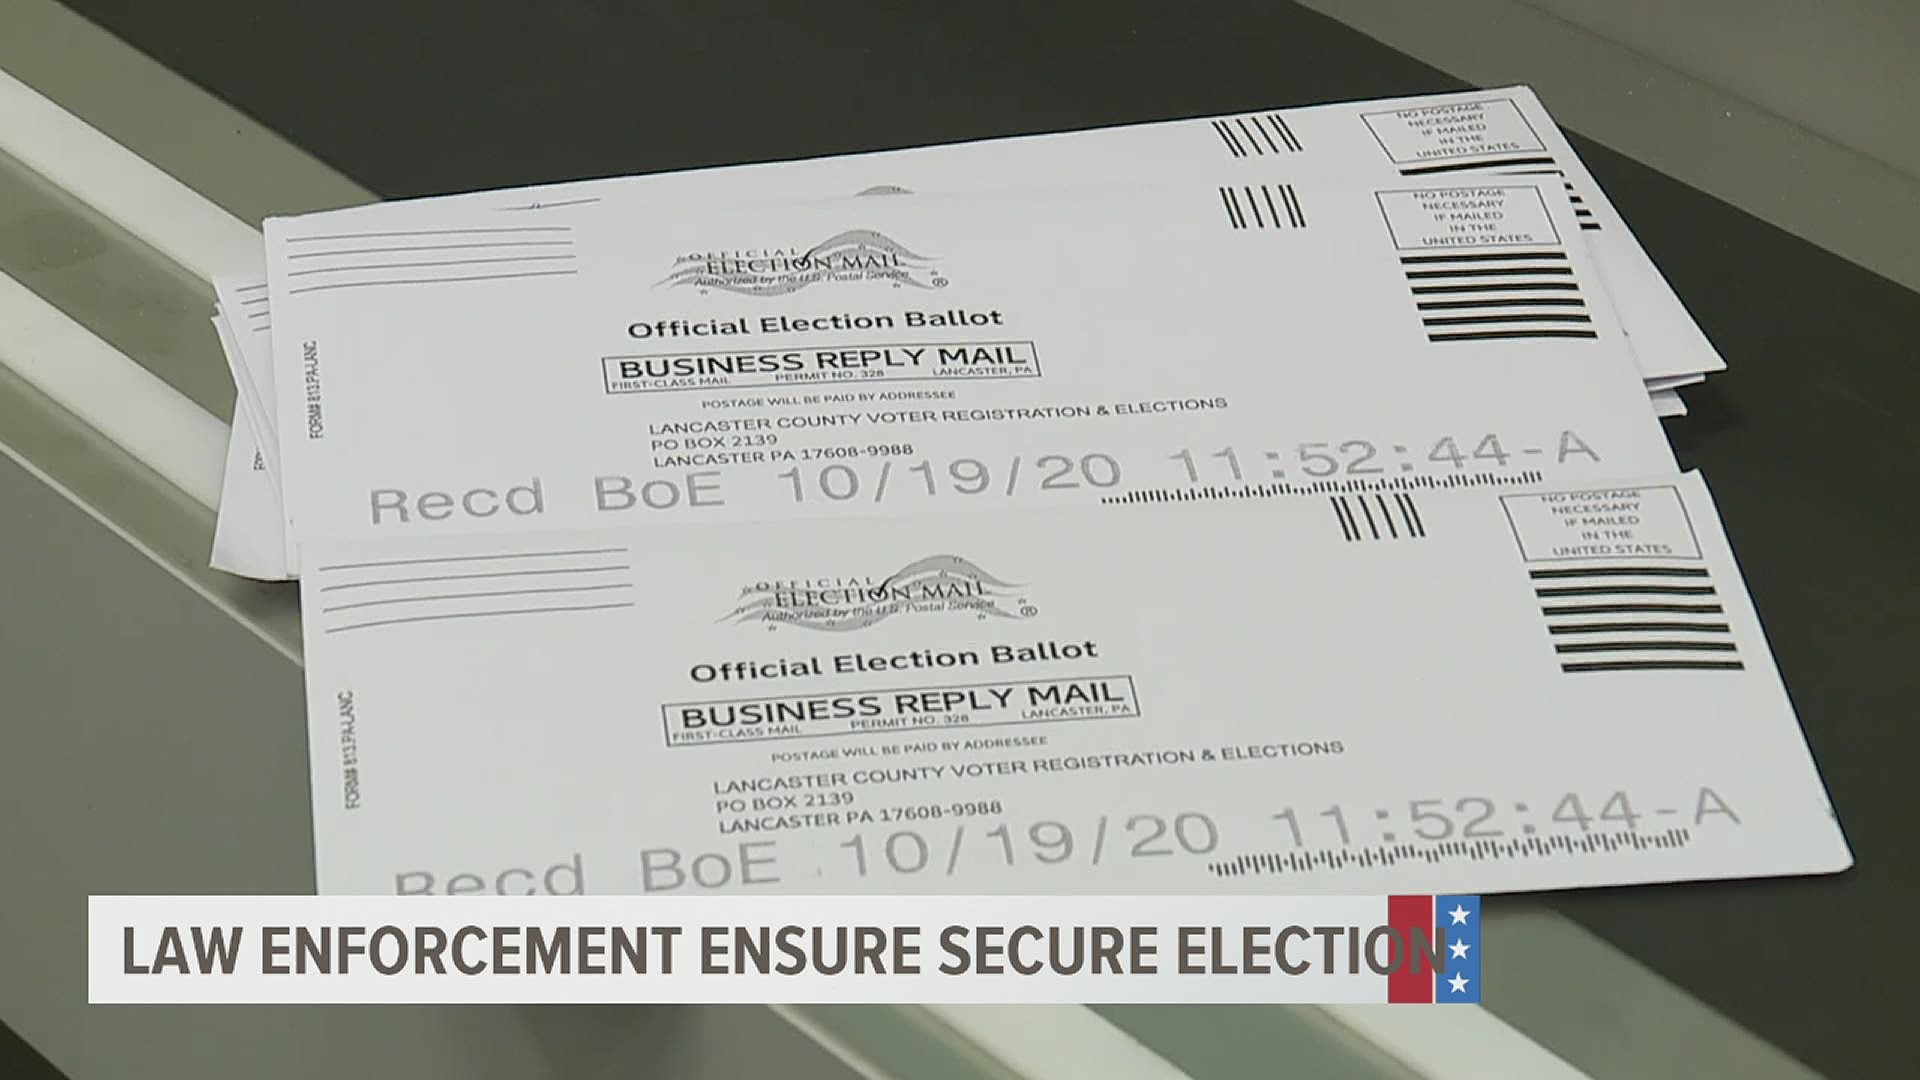 "we encourage voters to return their ballots as soon as possible to get them processed as quickly as possible on election morning."